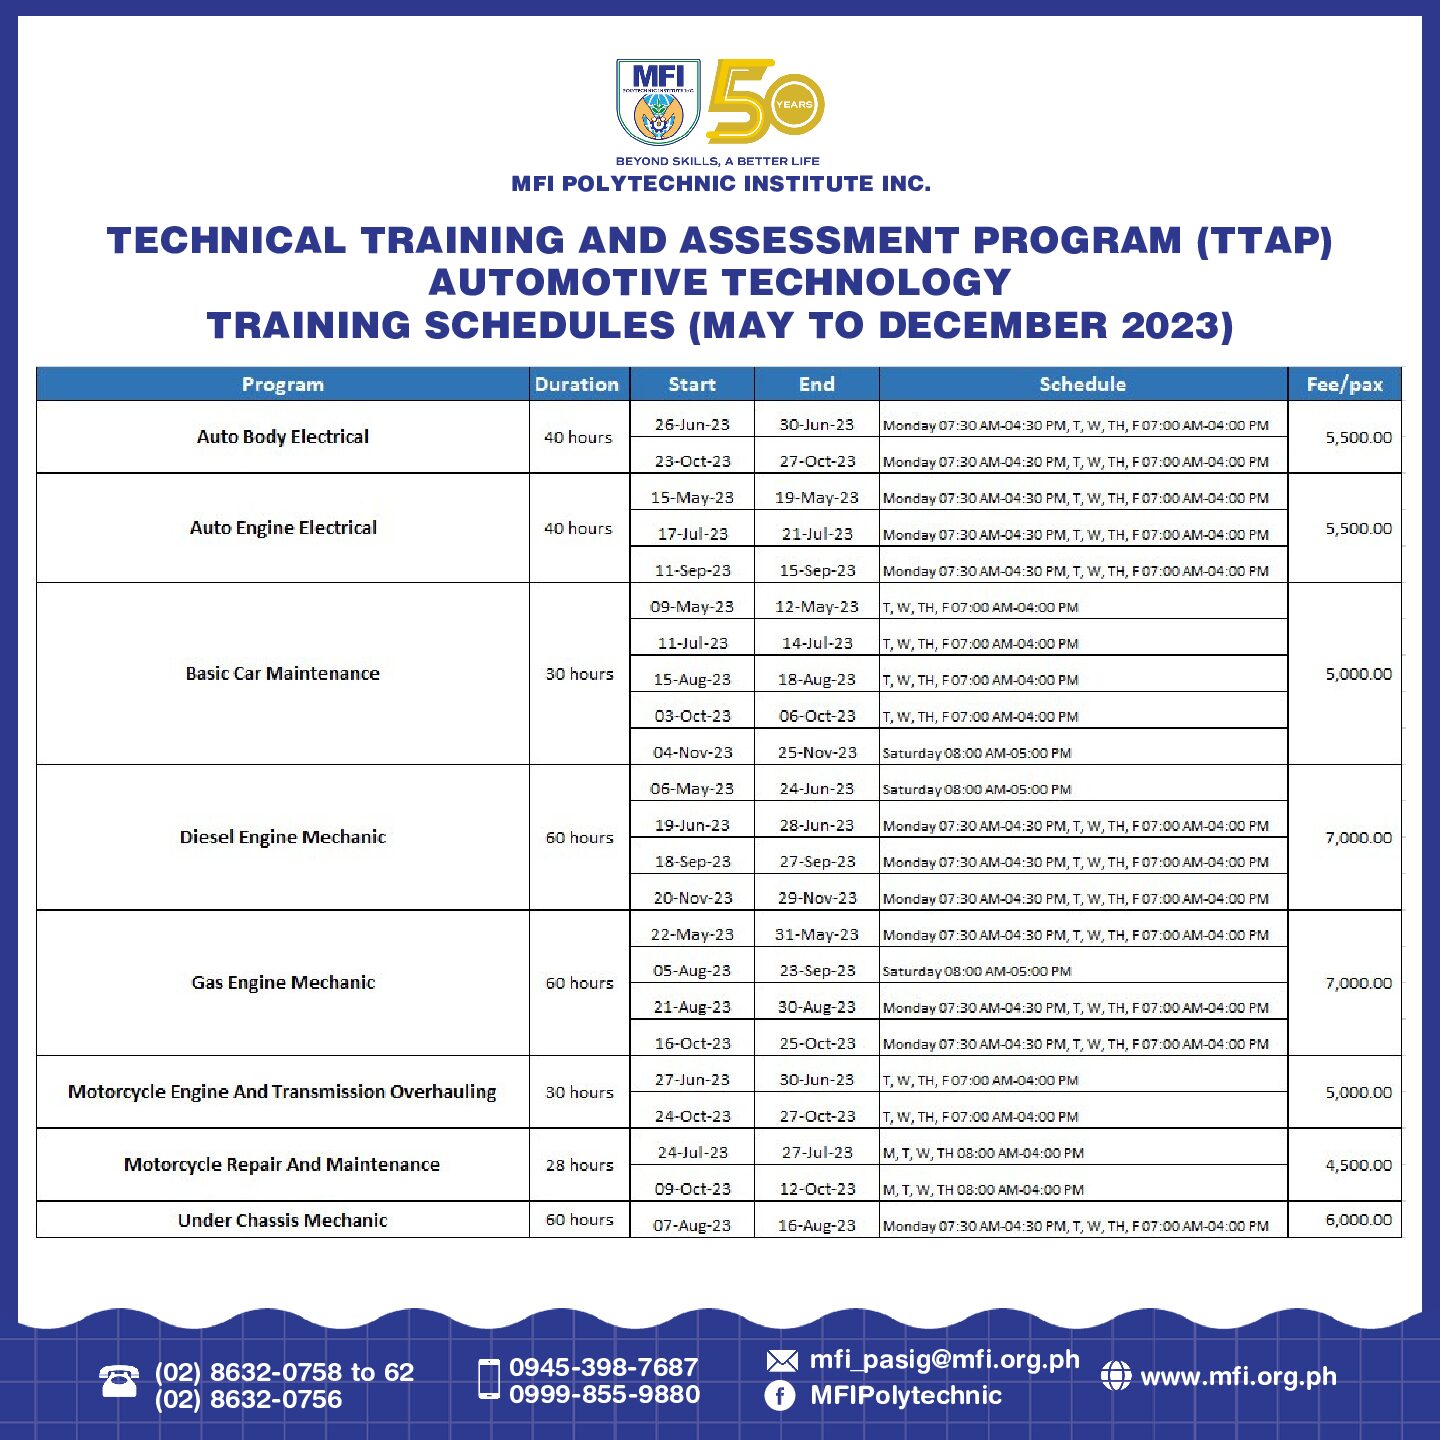 Technical Training and Assessment Program (TTAP) Schedules